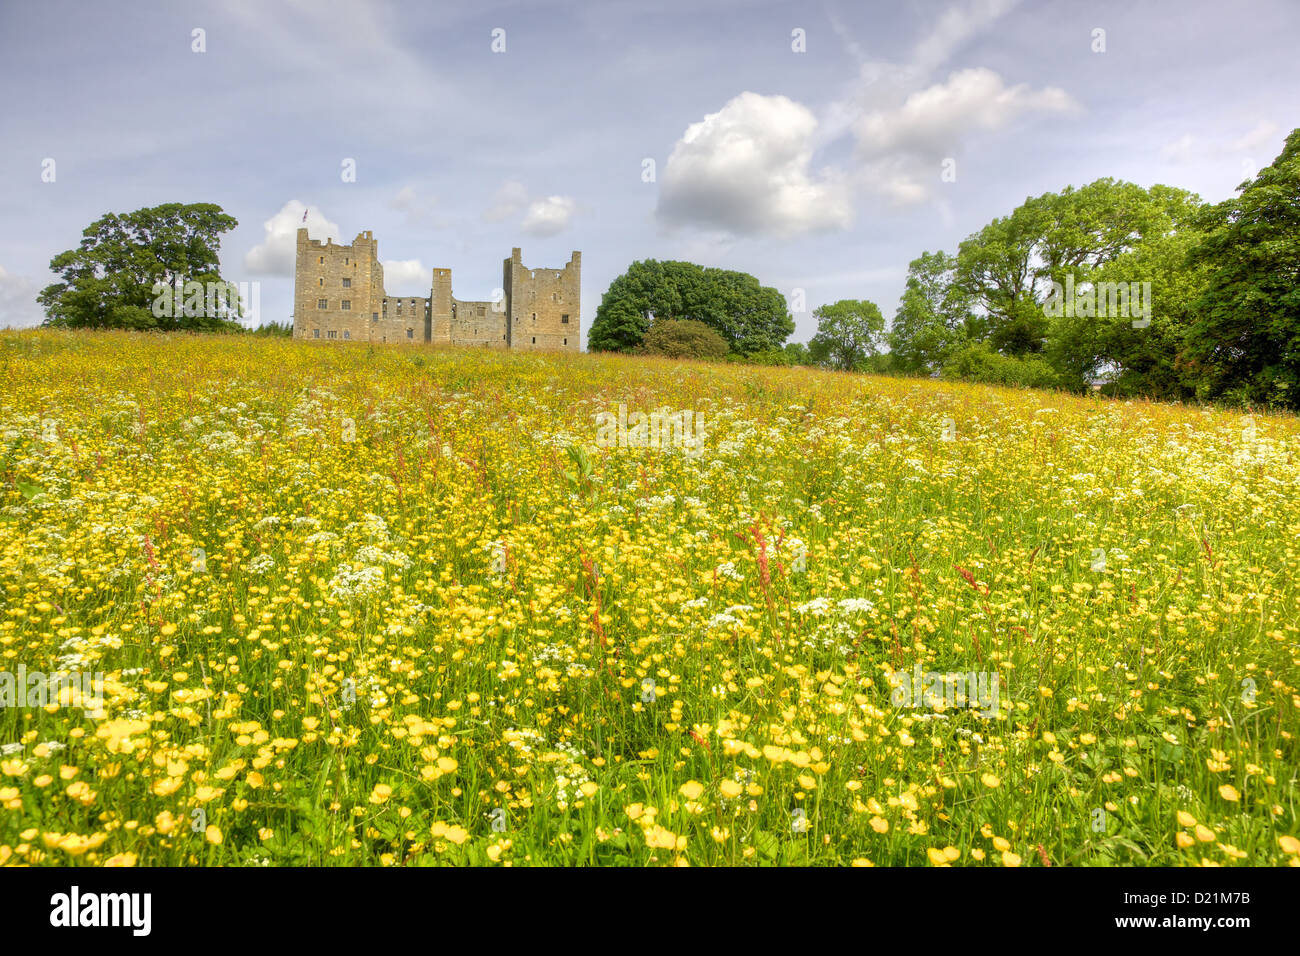 Bolton Castle, a 14th-century castle located in Wensleydale, North Yorkshire, in England. Stock Photo